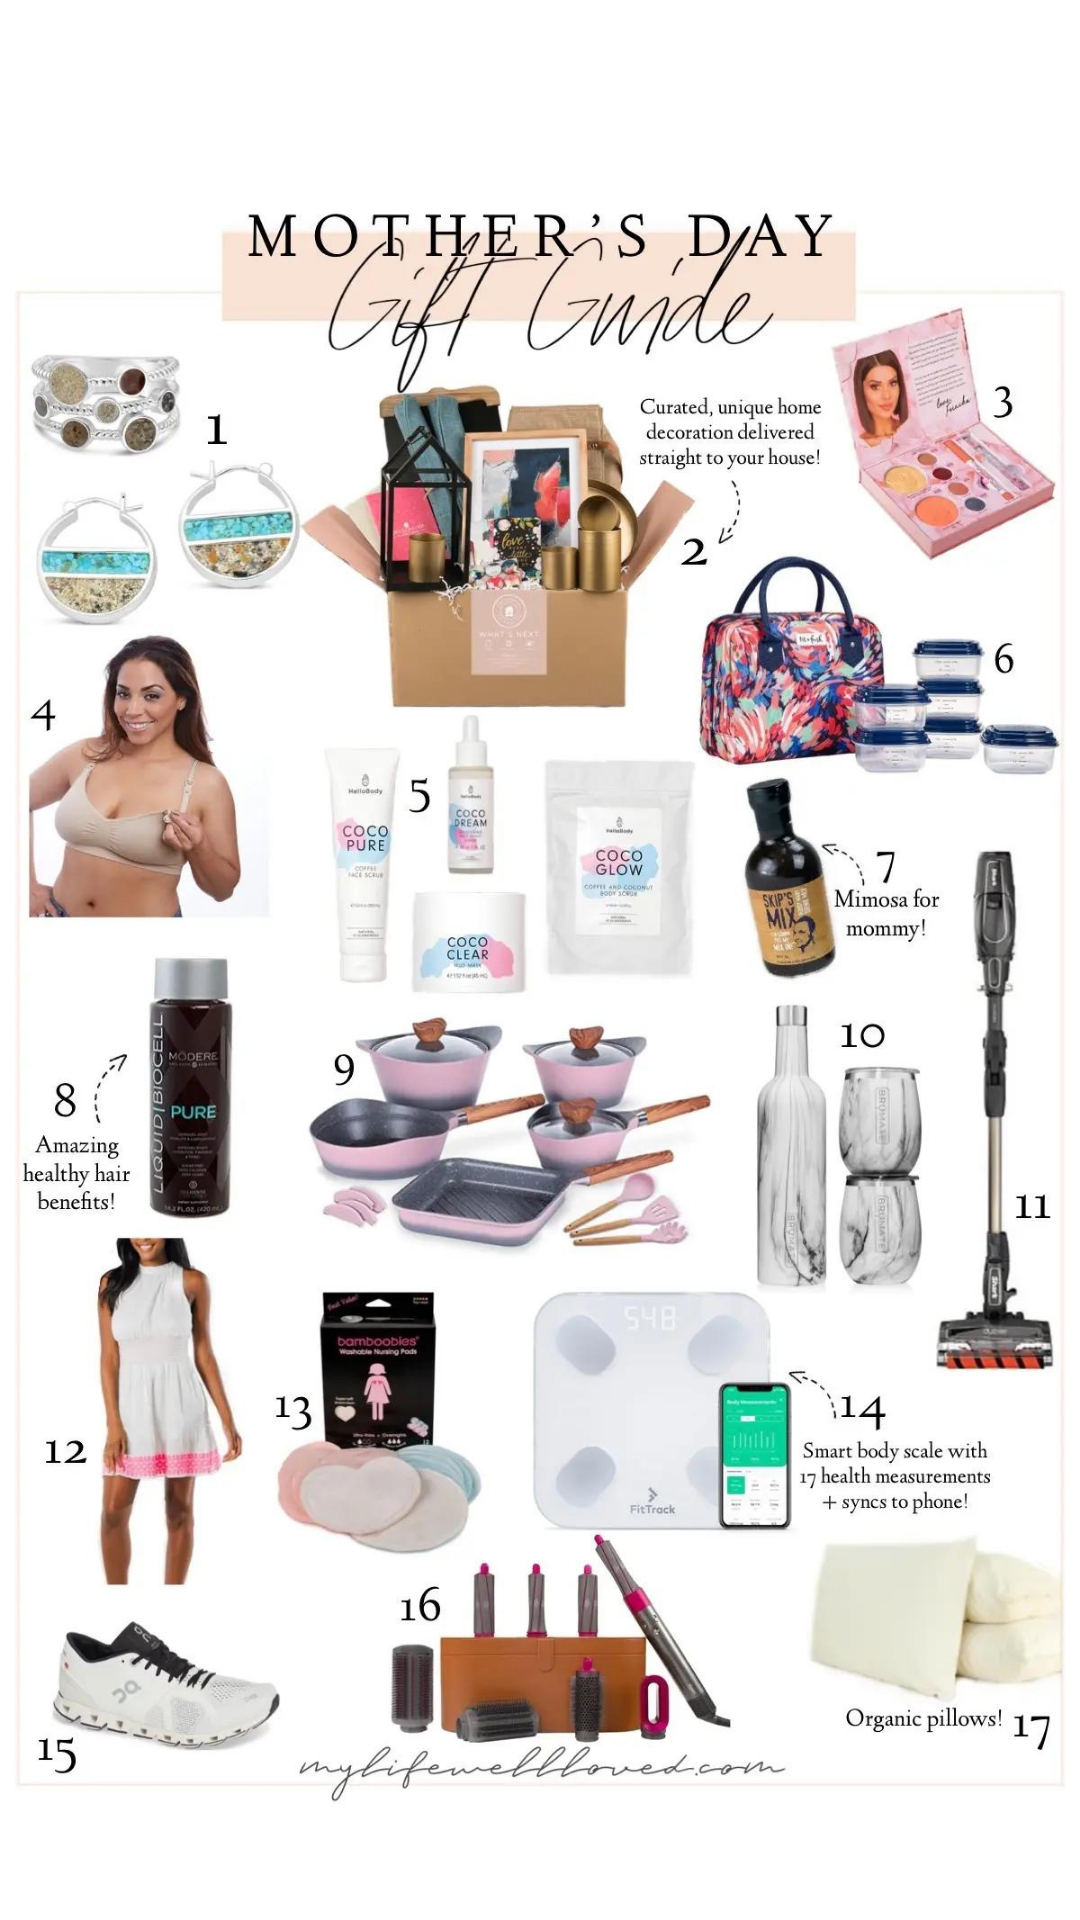 12 Absolutely Awesome Health and Fitness Gifts for Mom | iMore